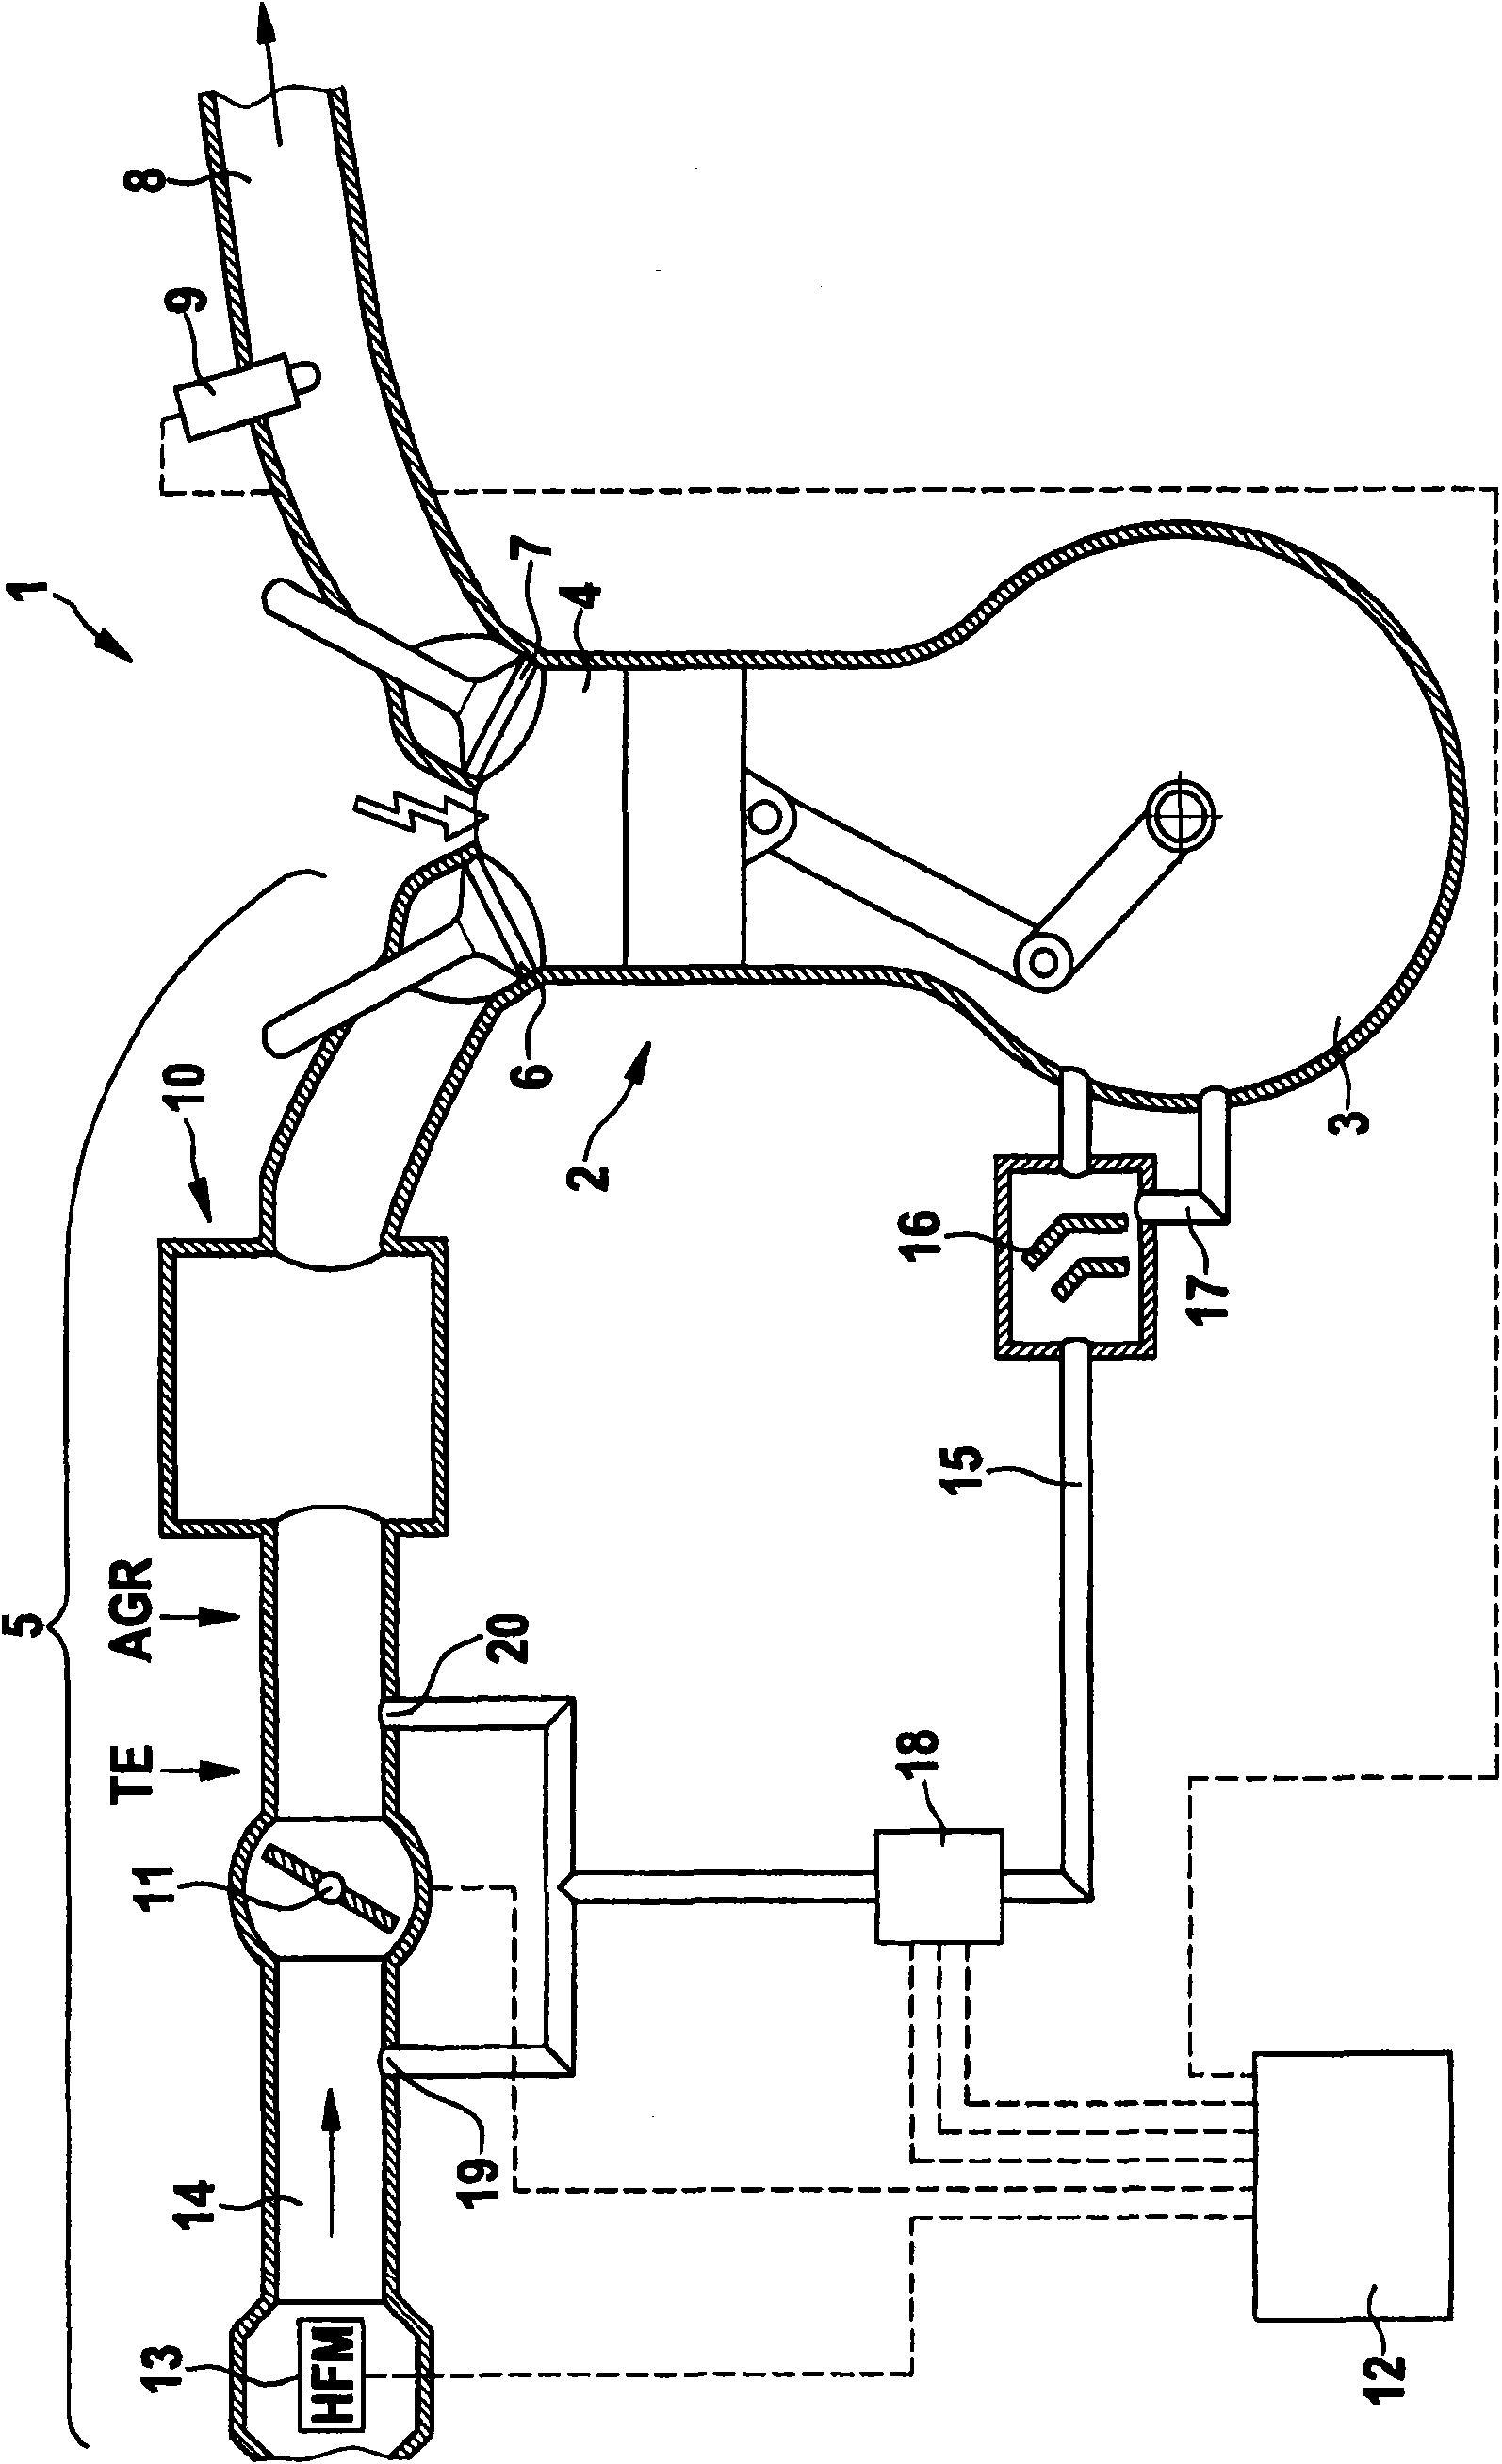 Method and device for diagnosing the ventilation in crankcase of internal combustion engine